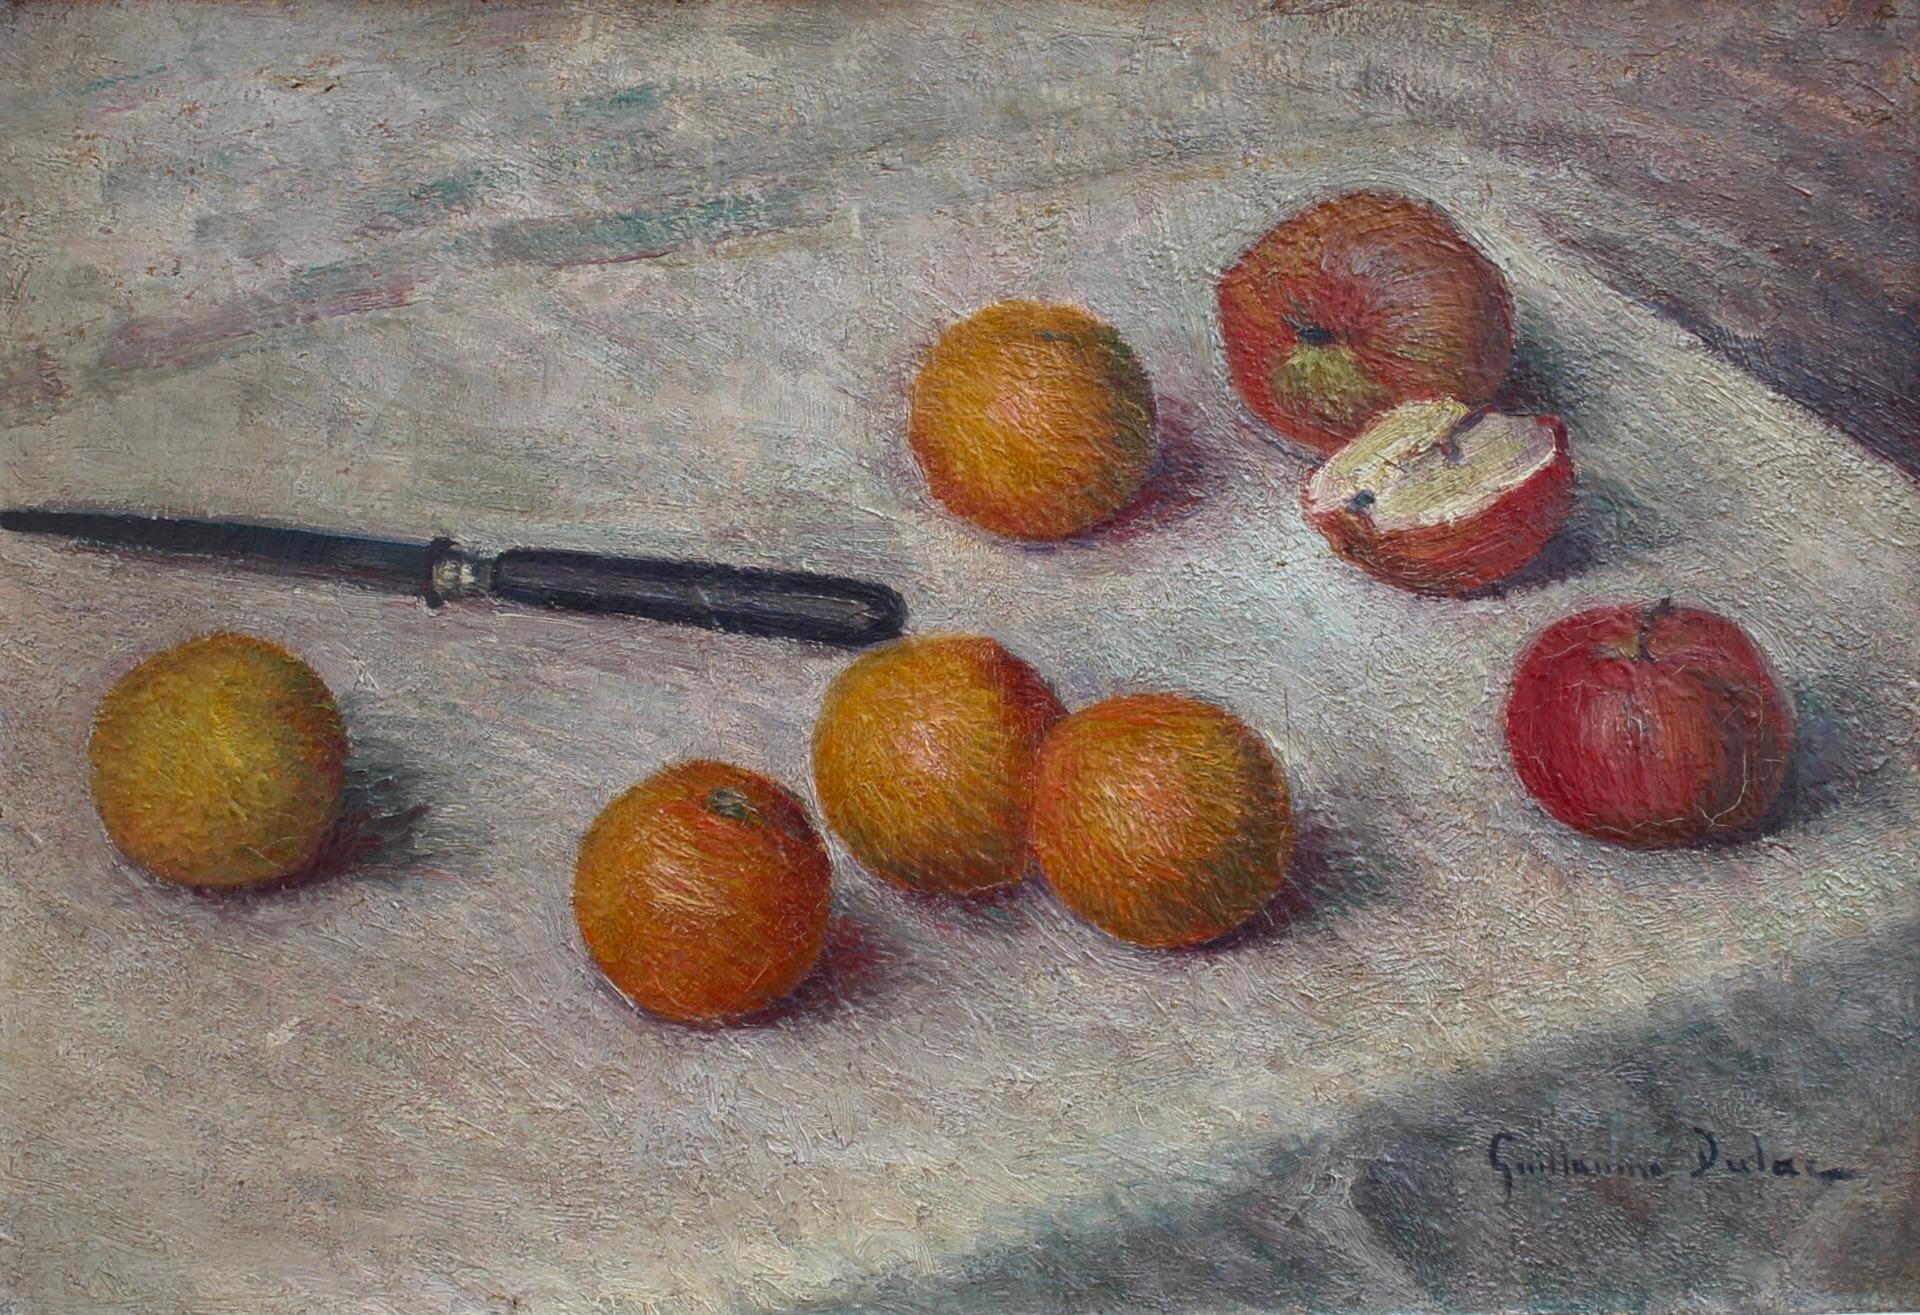 'Oranges and Apples', oil on canvas, still life by Guillaume Dulac (circa 1920s). A magnificent study of fruit and light painted with a deft touch and a delicate brushstroke. The evident quality and desirability of his artwork are incongruent with